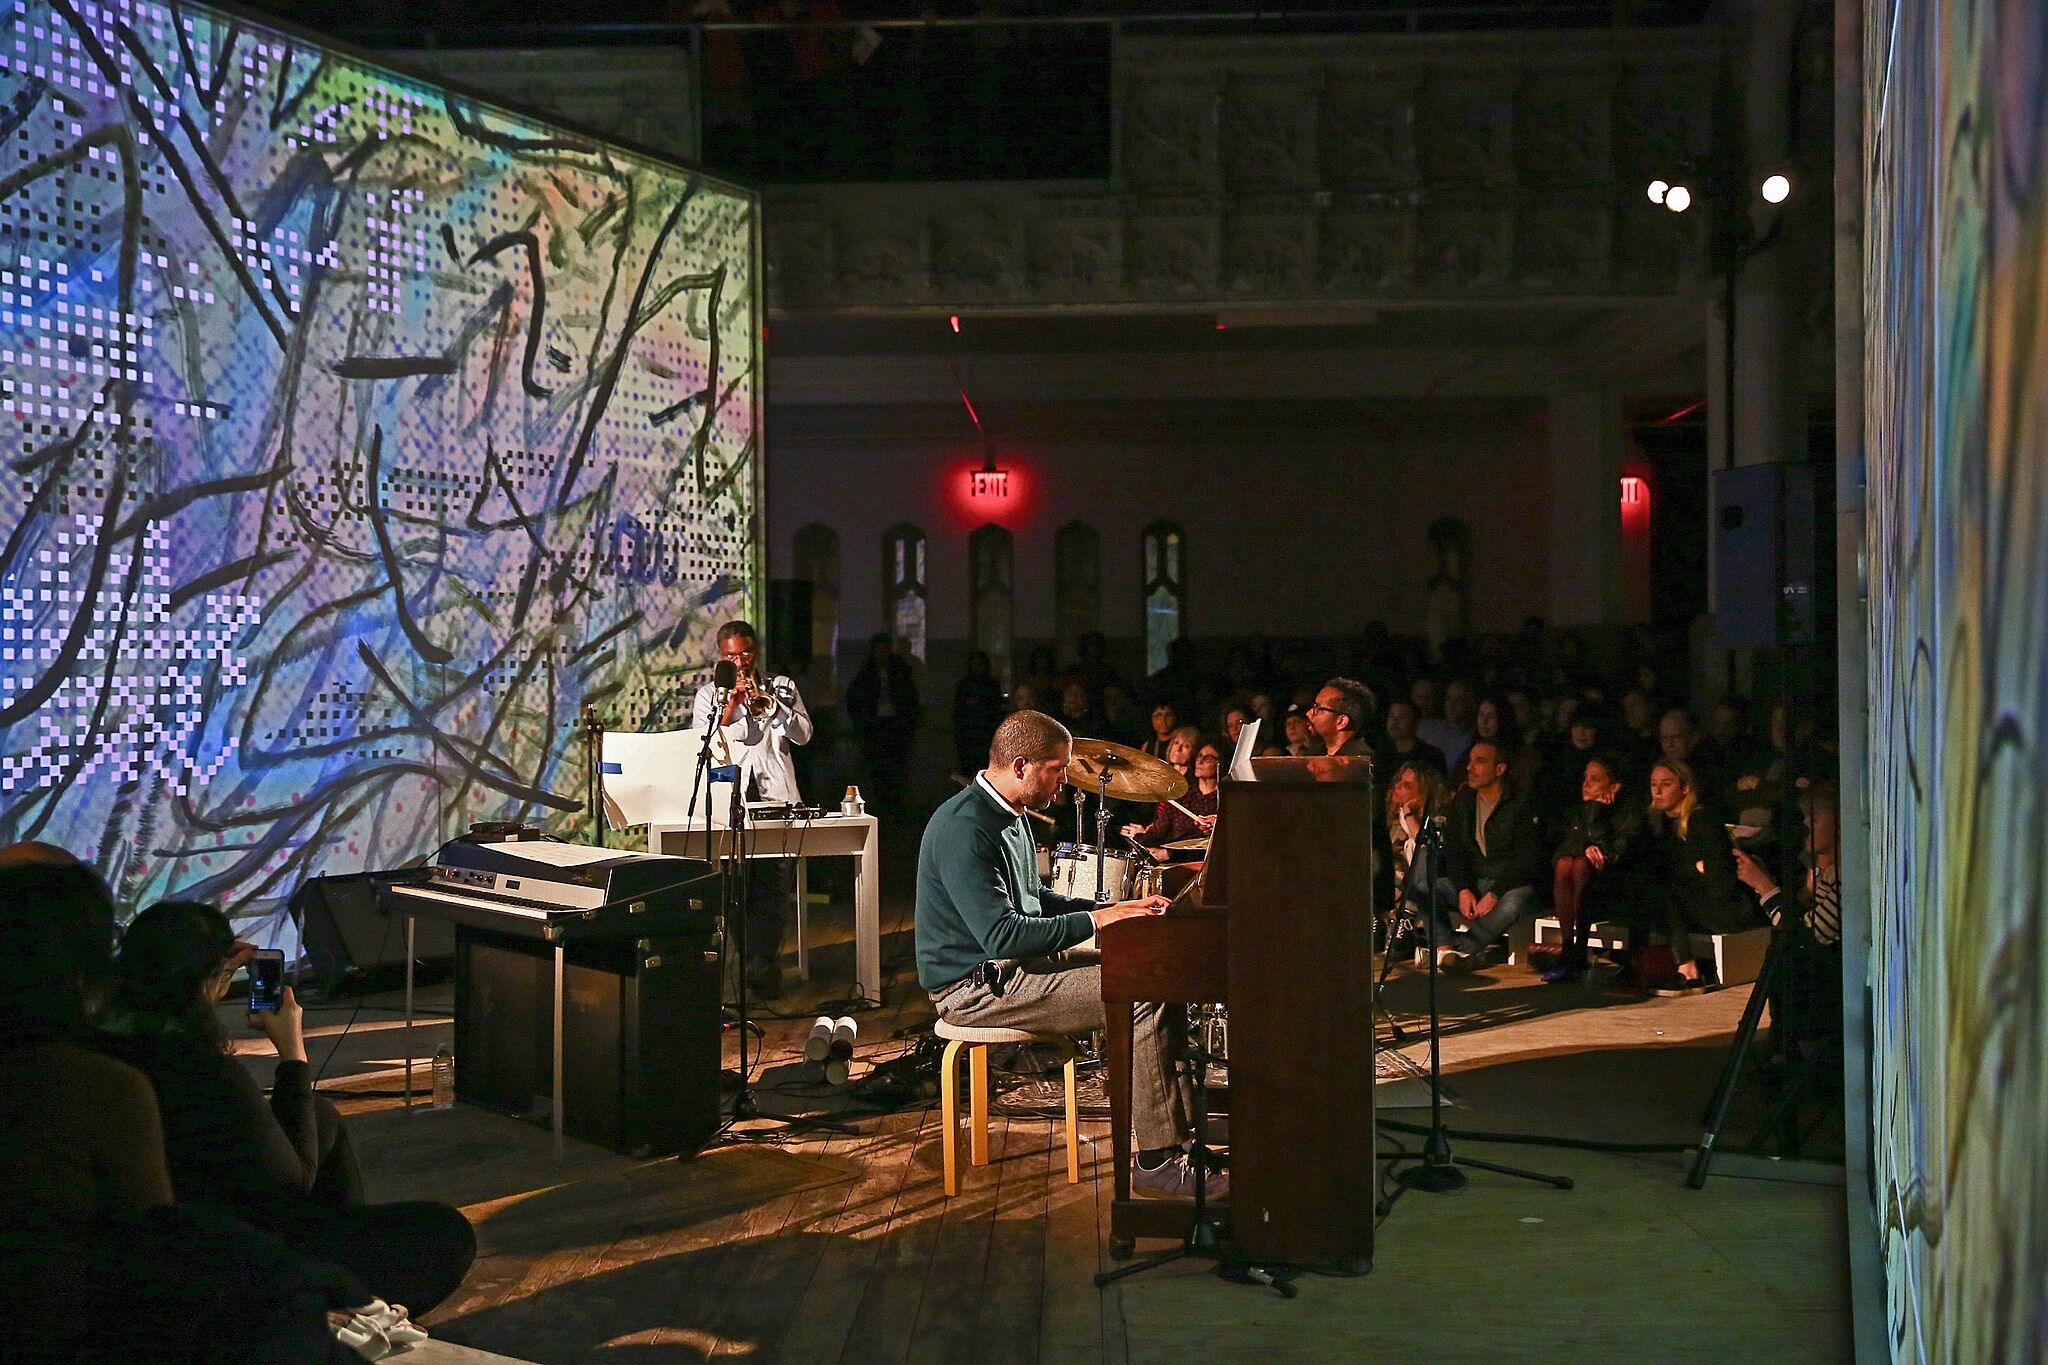 A live performance including a man at a piano.